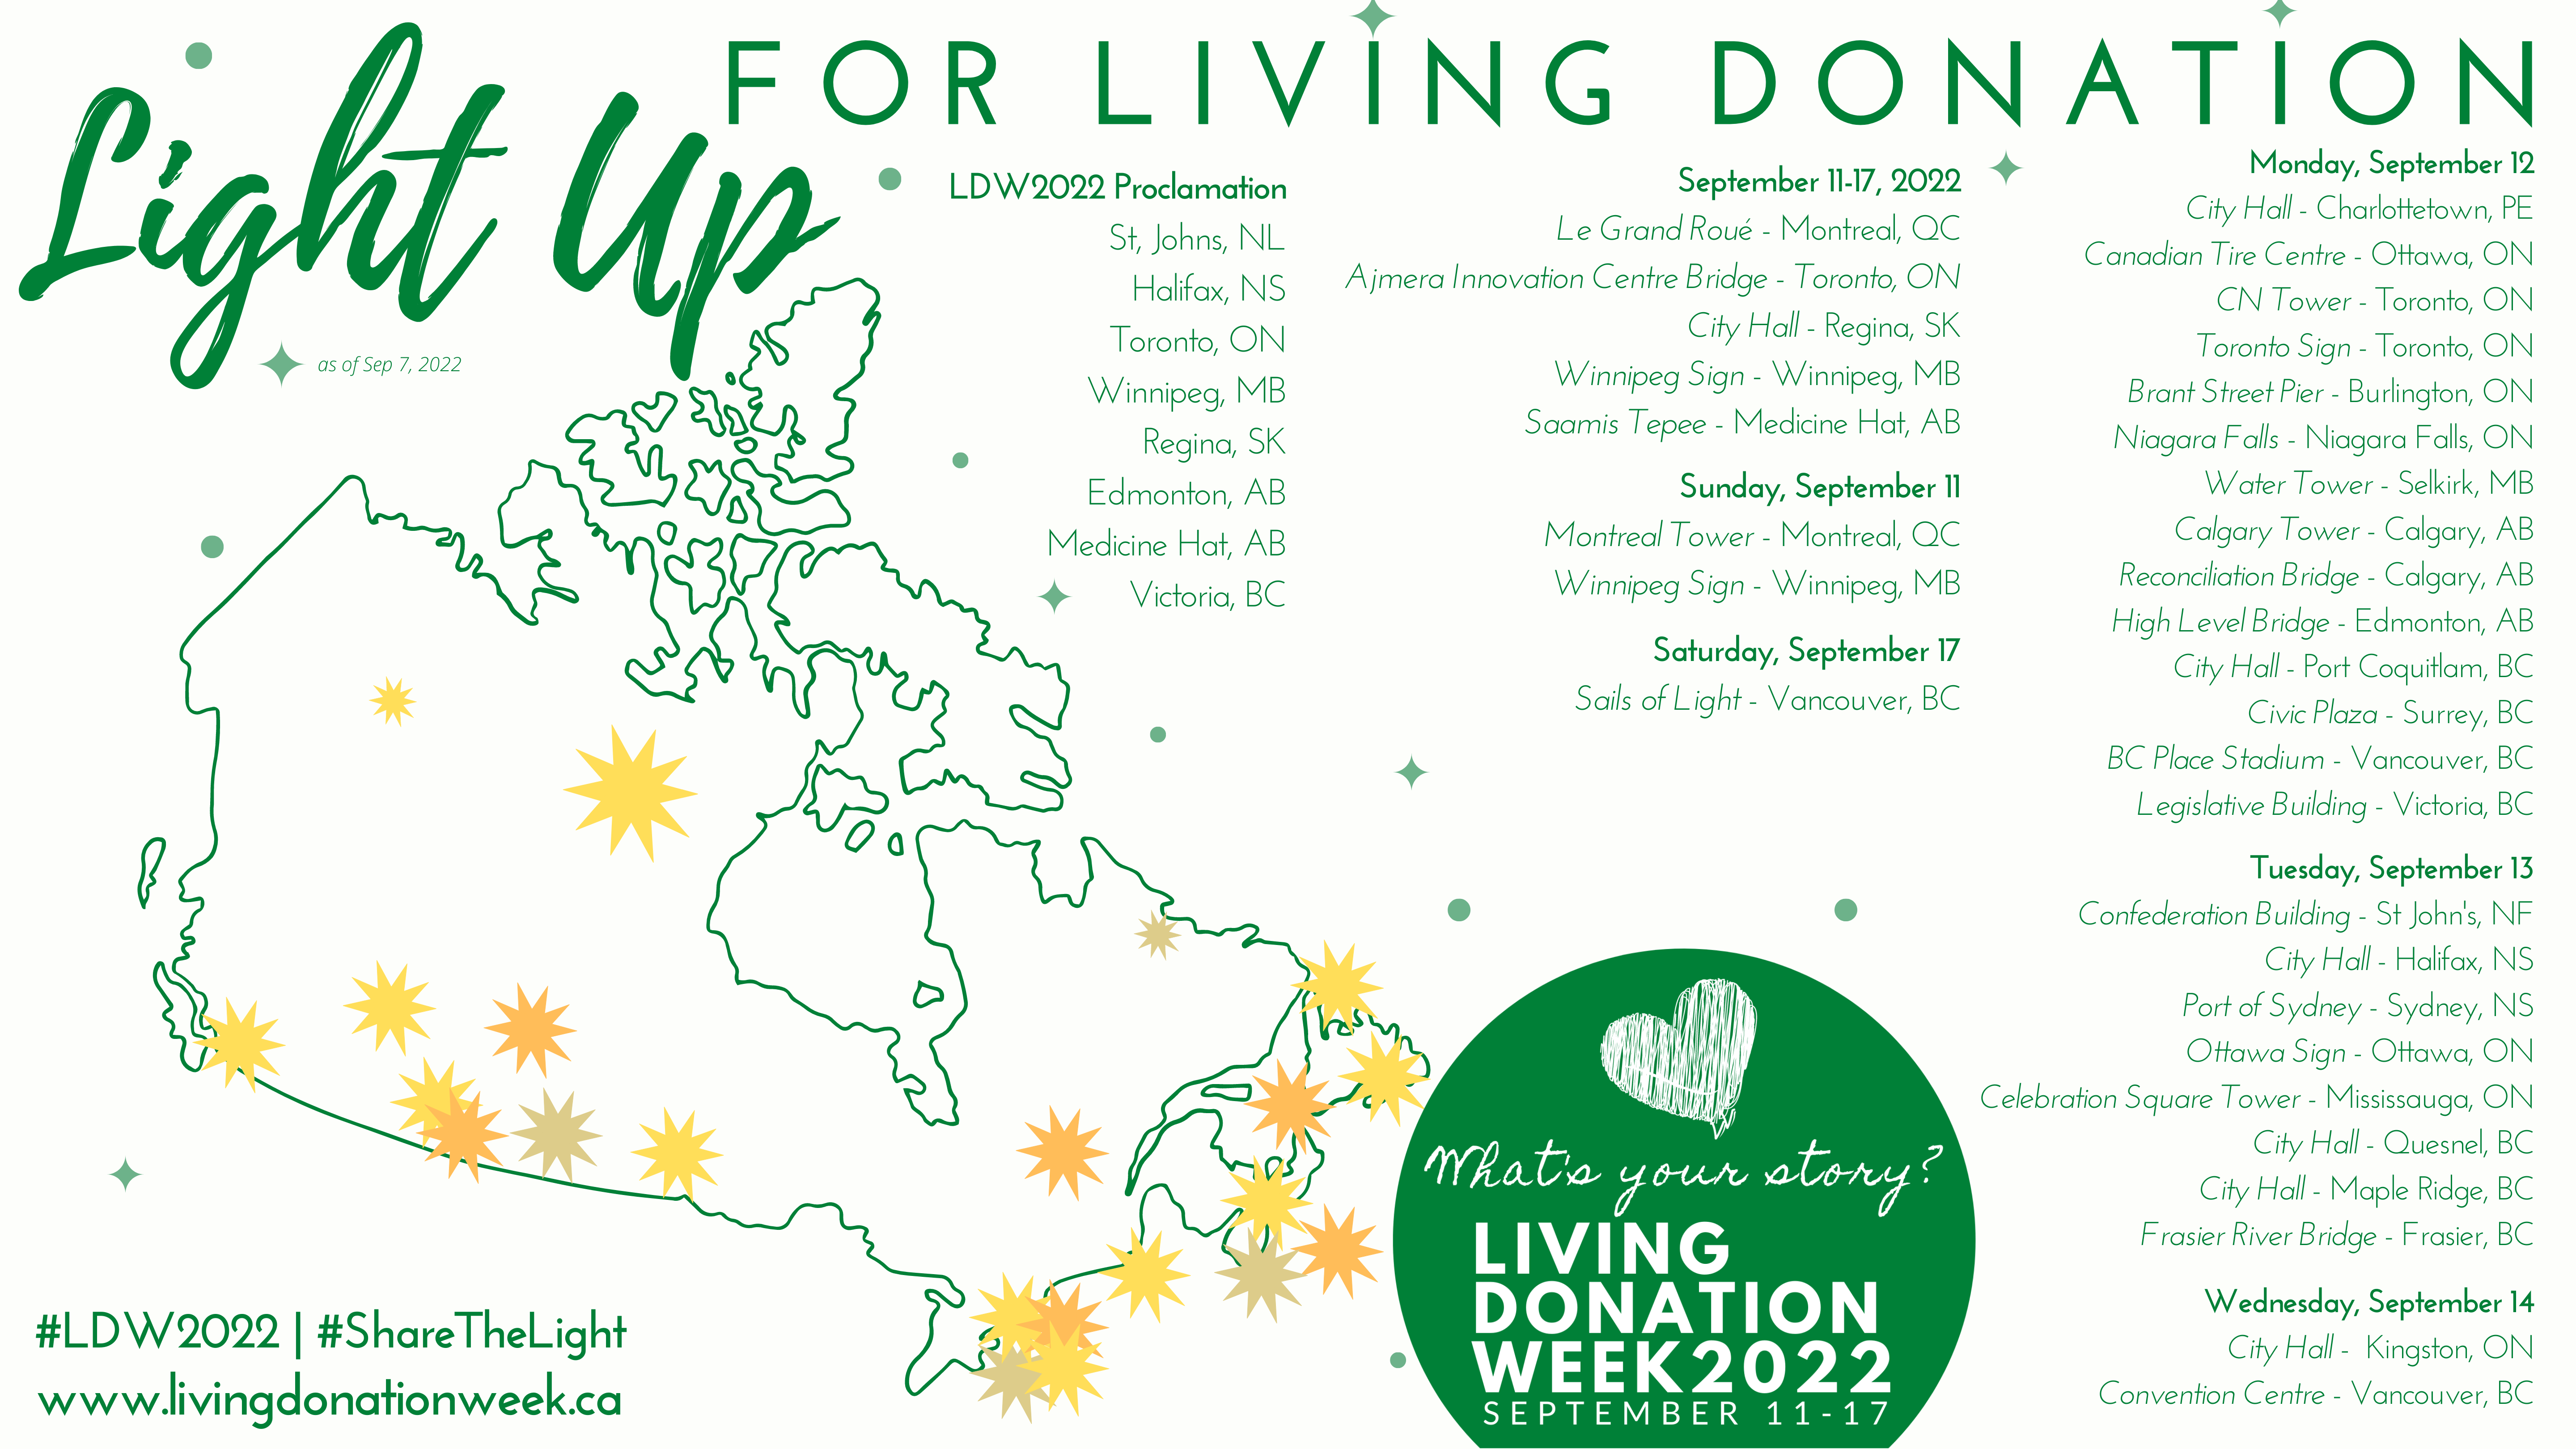  Light Up for Living Donation. This year, 25+ communities across Canada will light up for living organ donation.